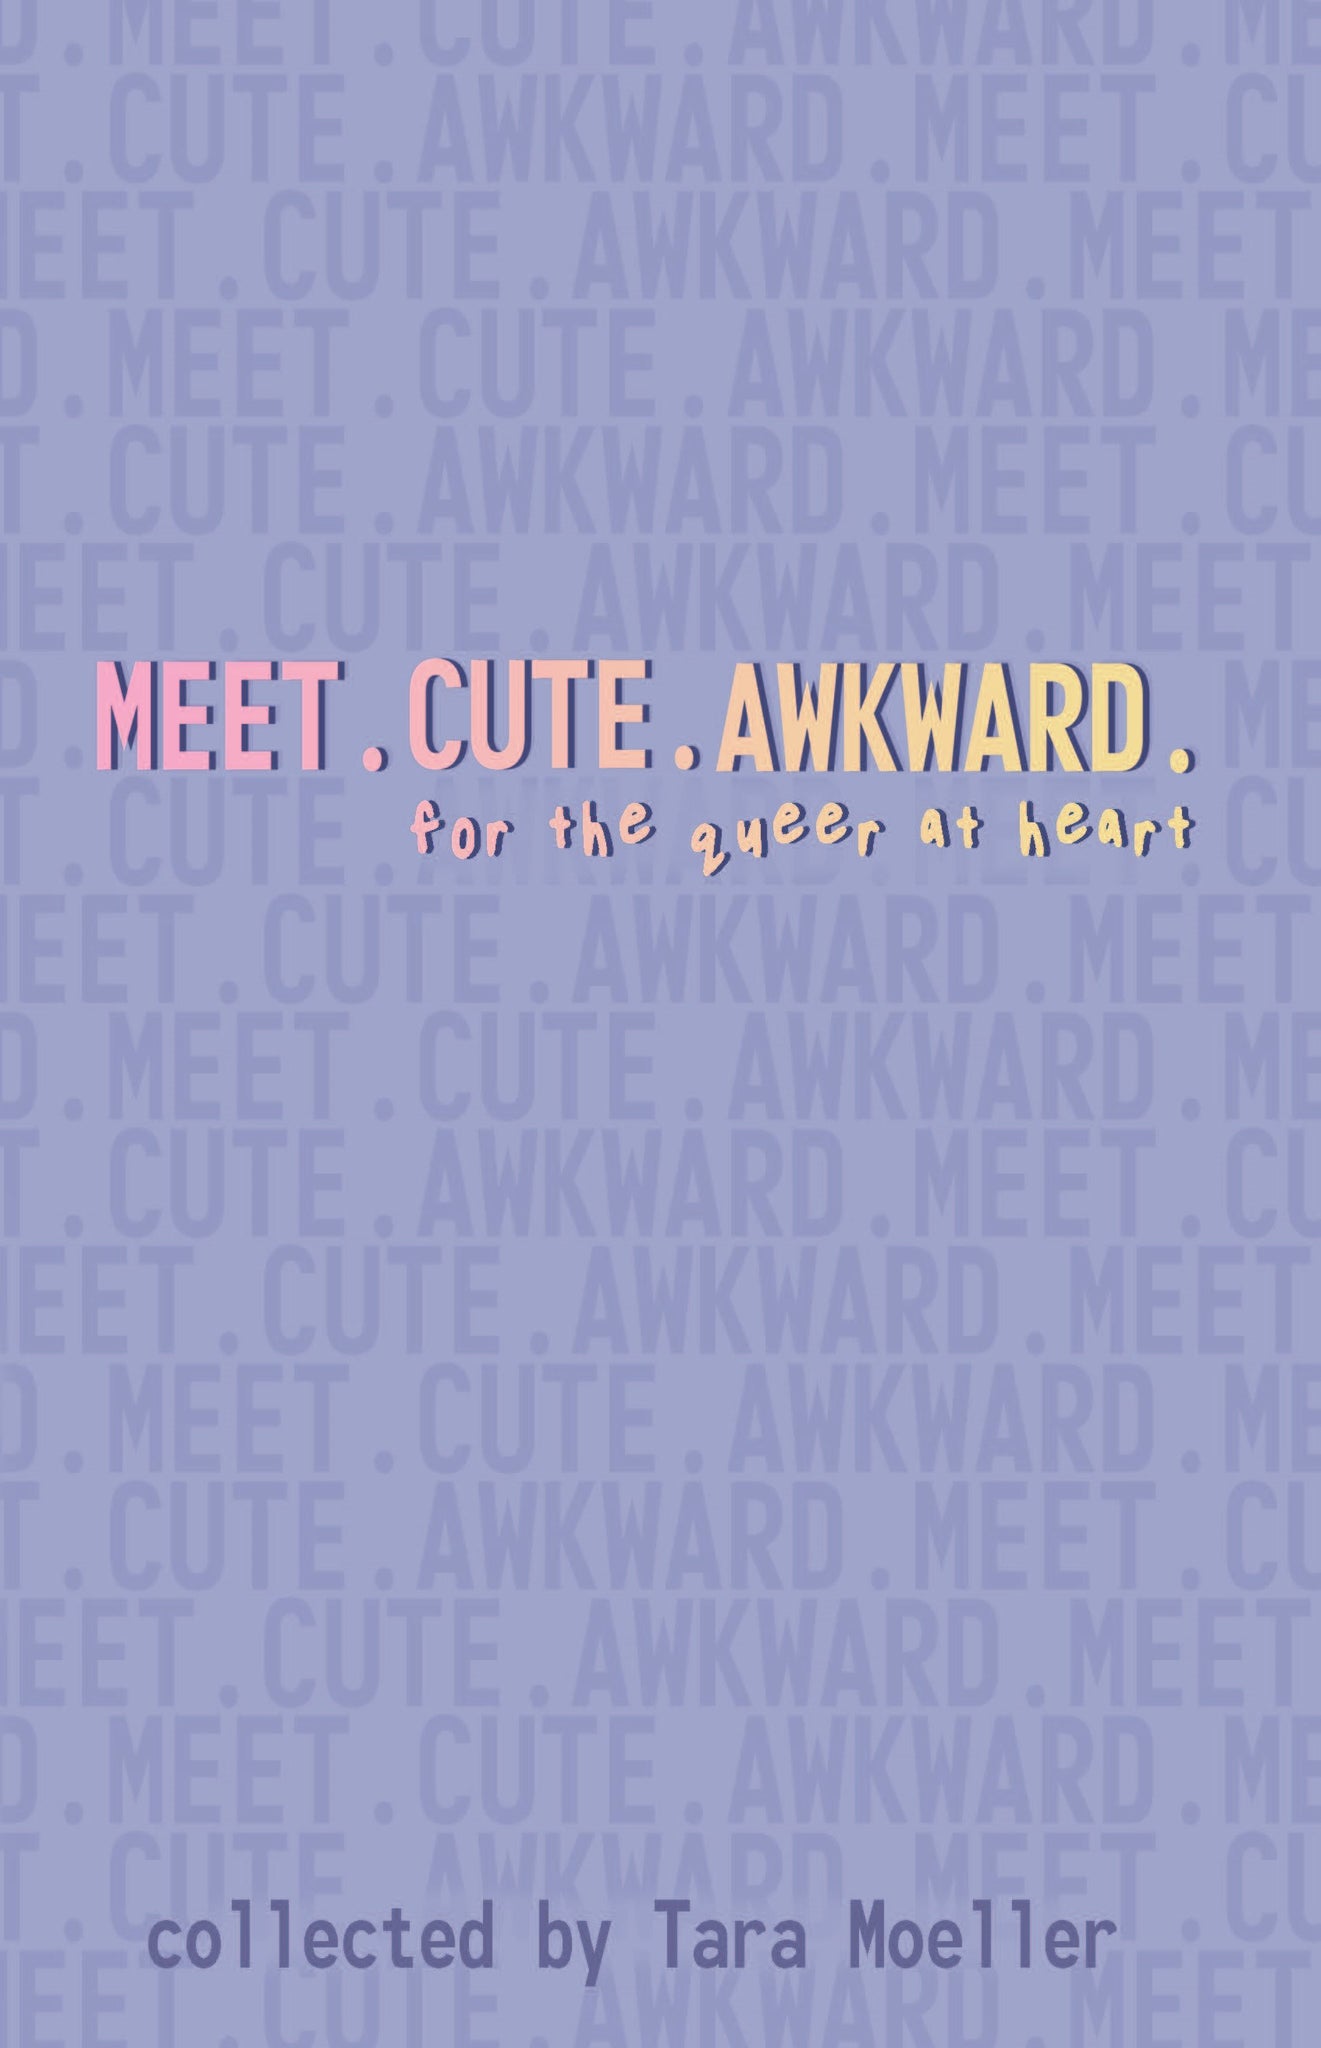 Meet. Cute. Awkward.  For the Queer at Heart